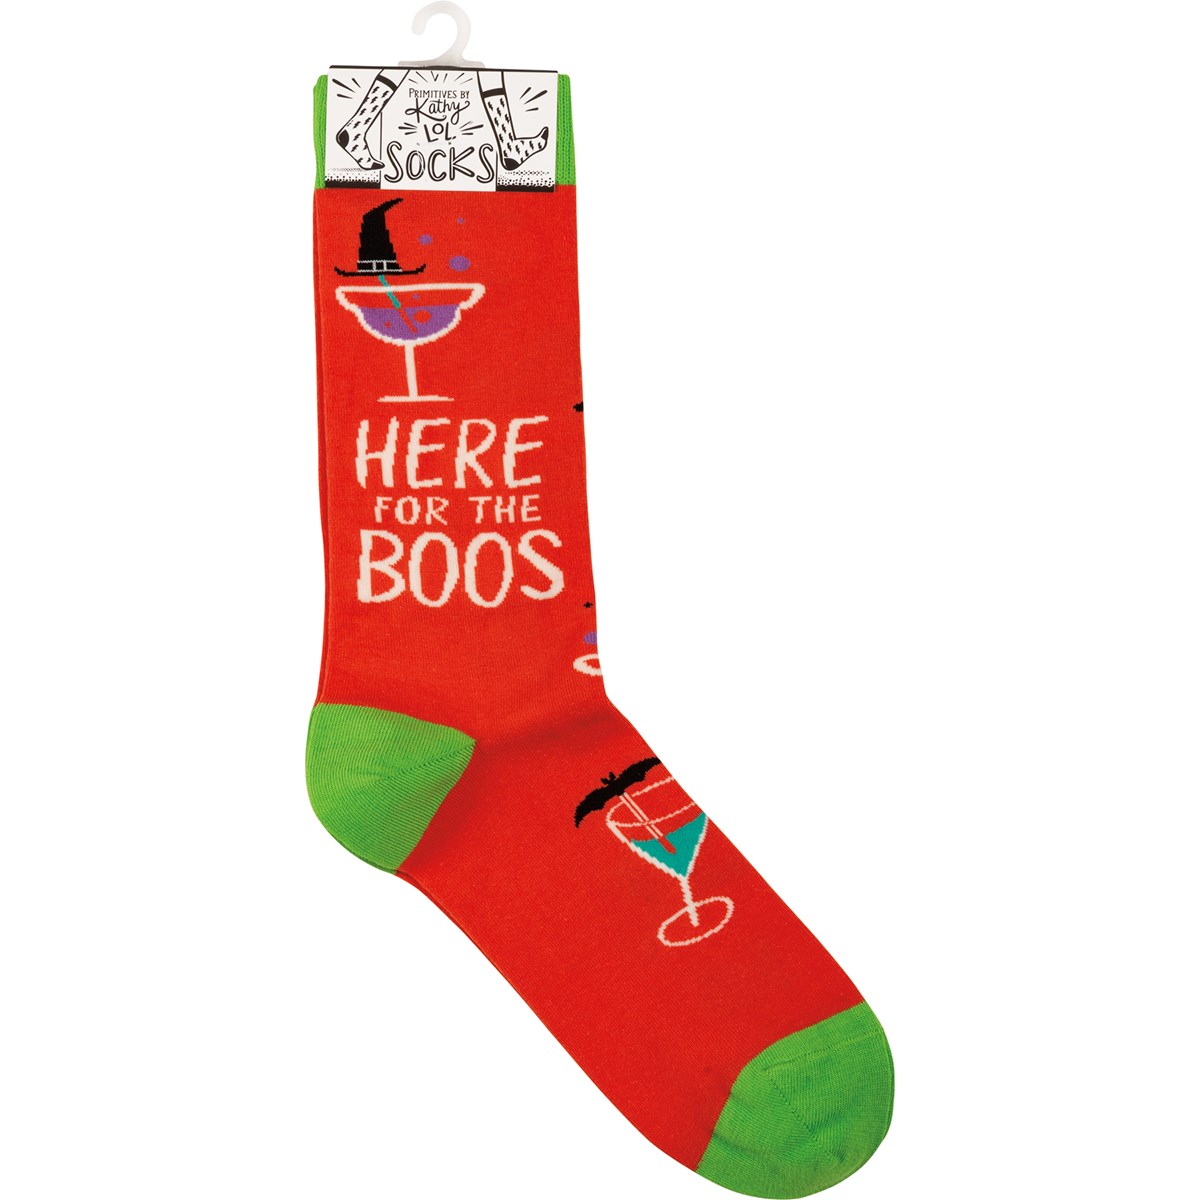 Socks - Here For The Boos - One Size Fits Most - Cotton, Nylon, Spandex